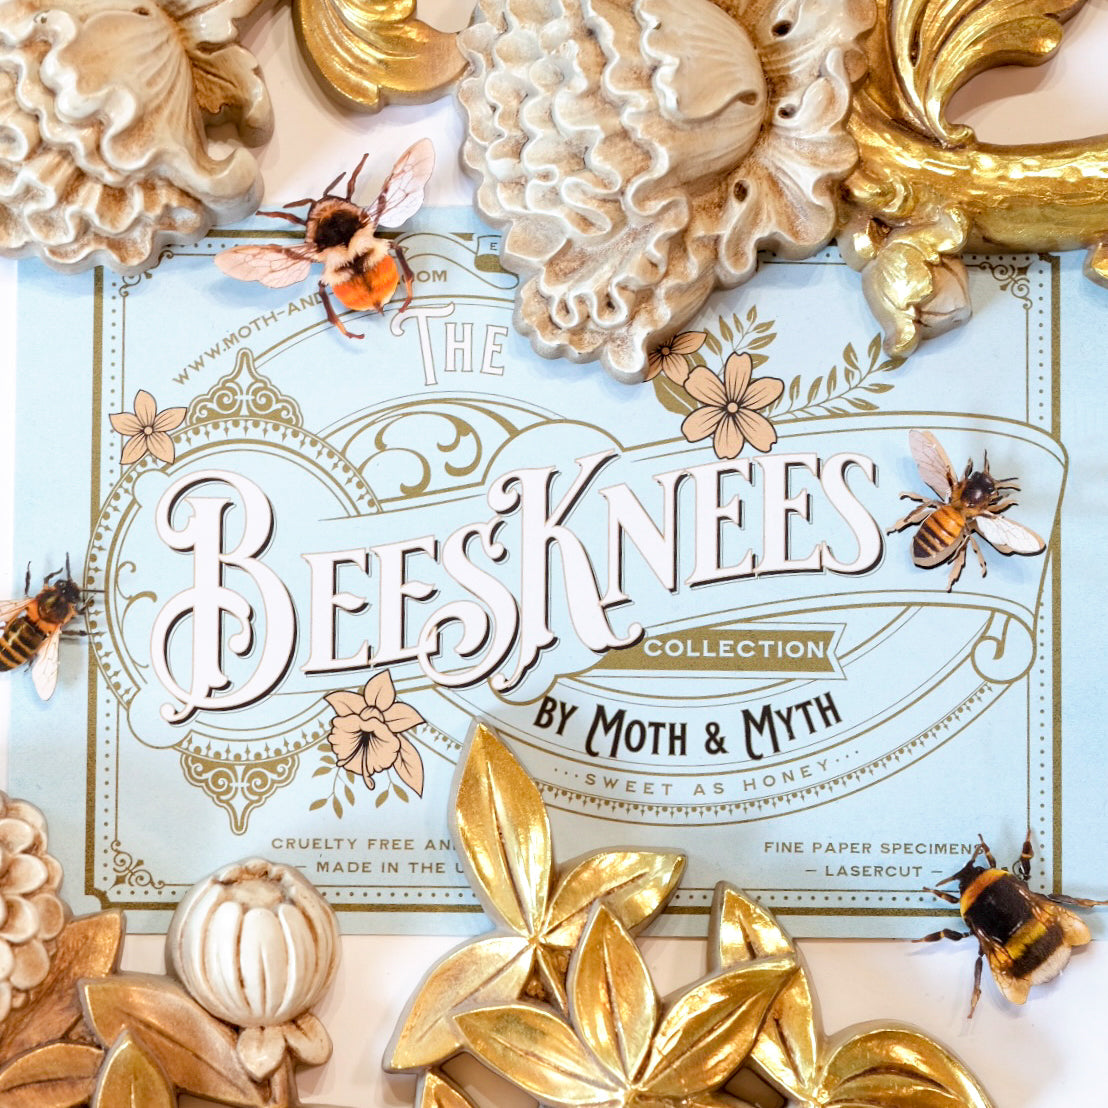 'The Bees Knees' Collection Artist Wholesale